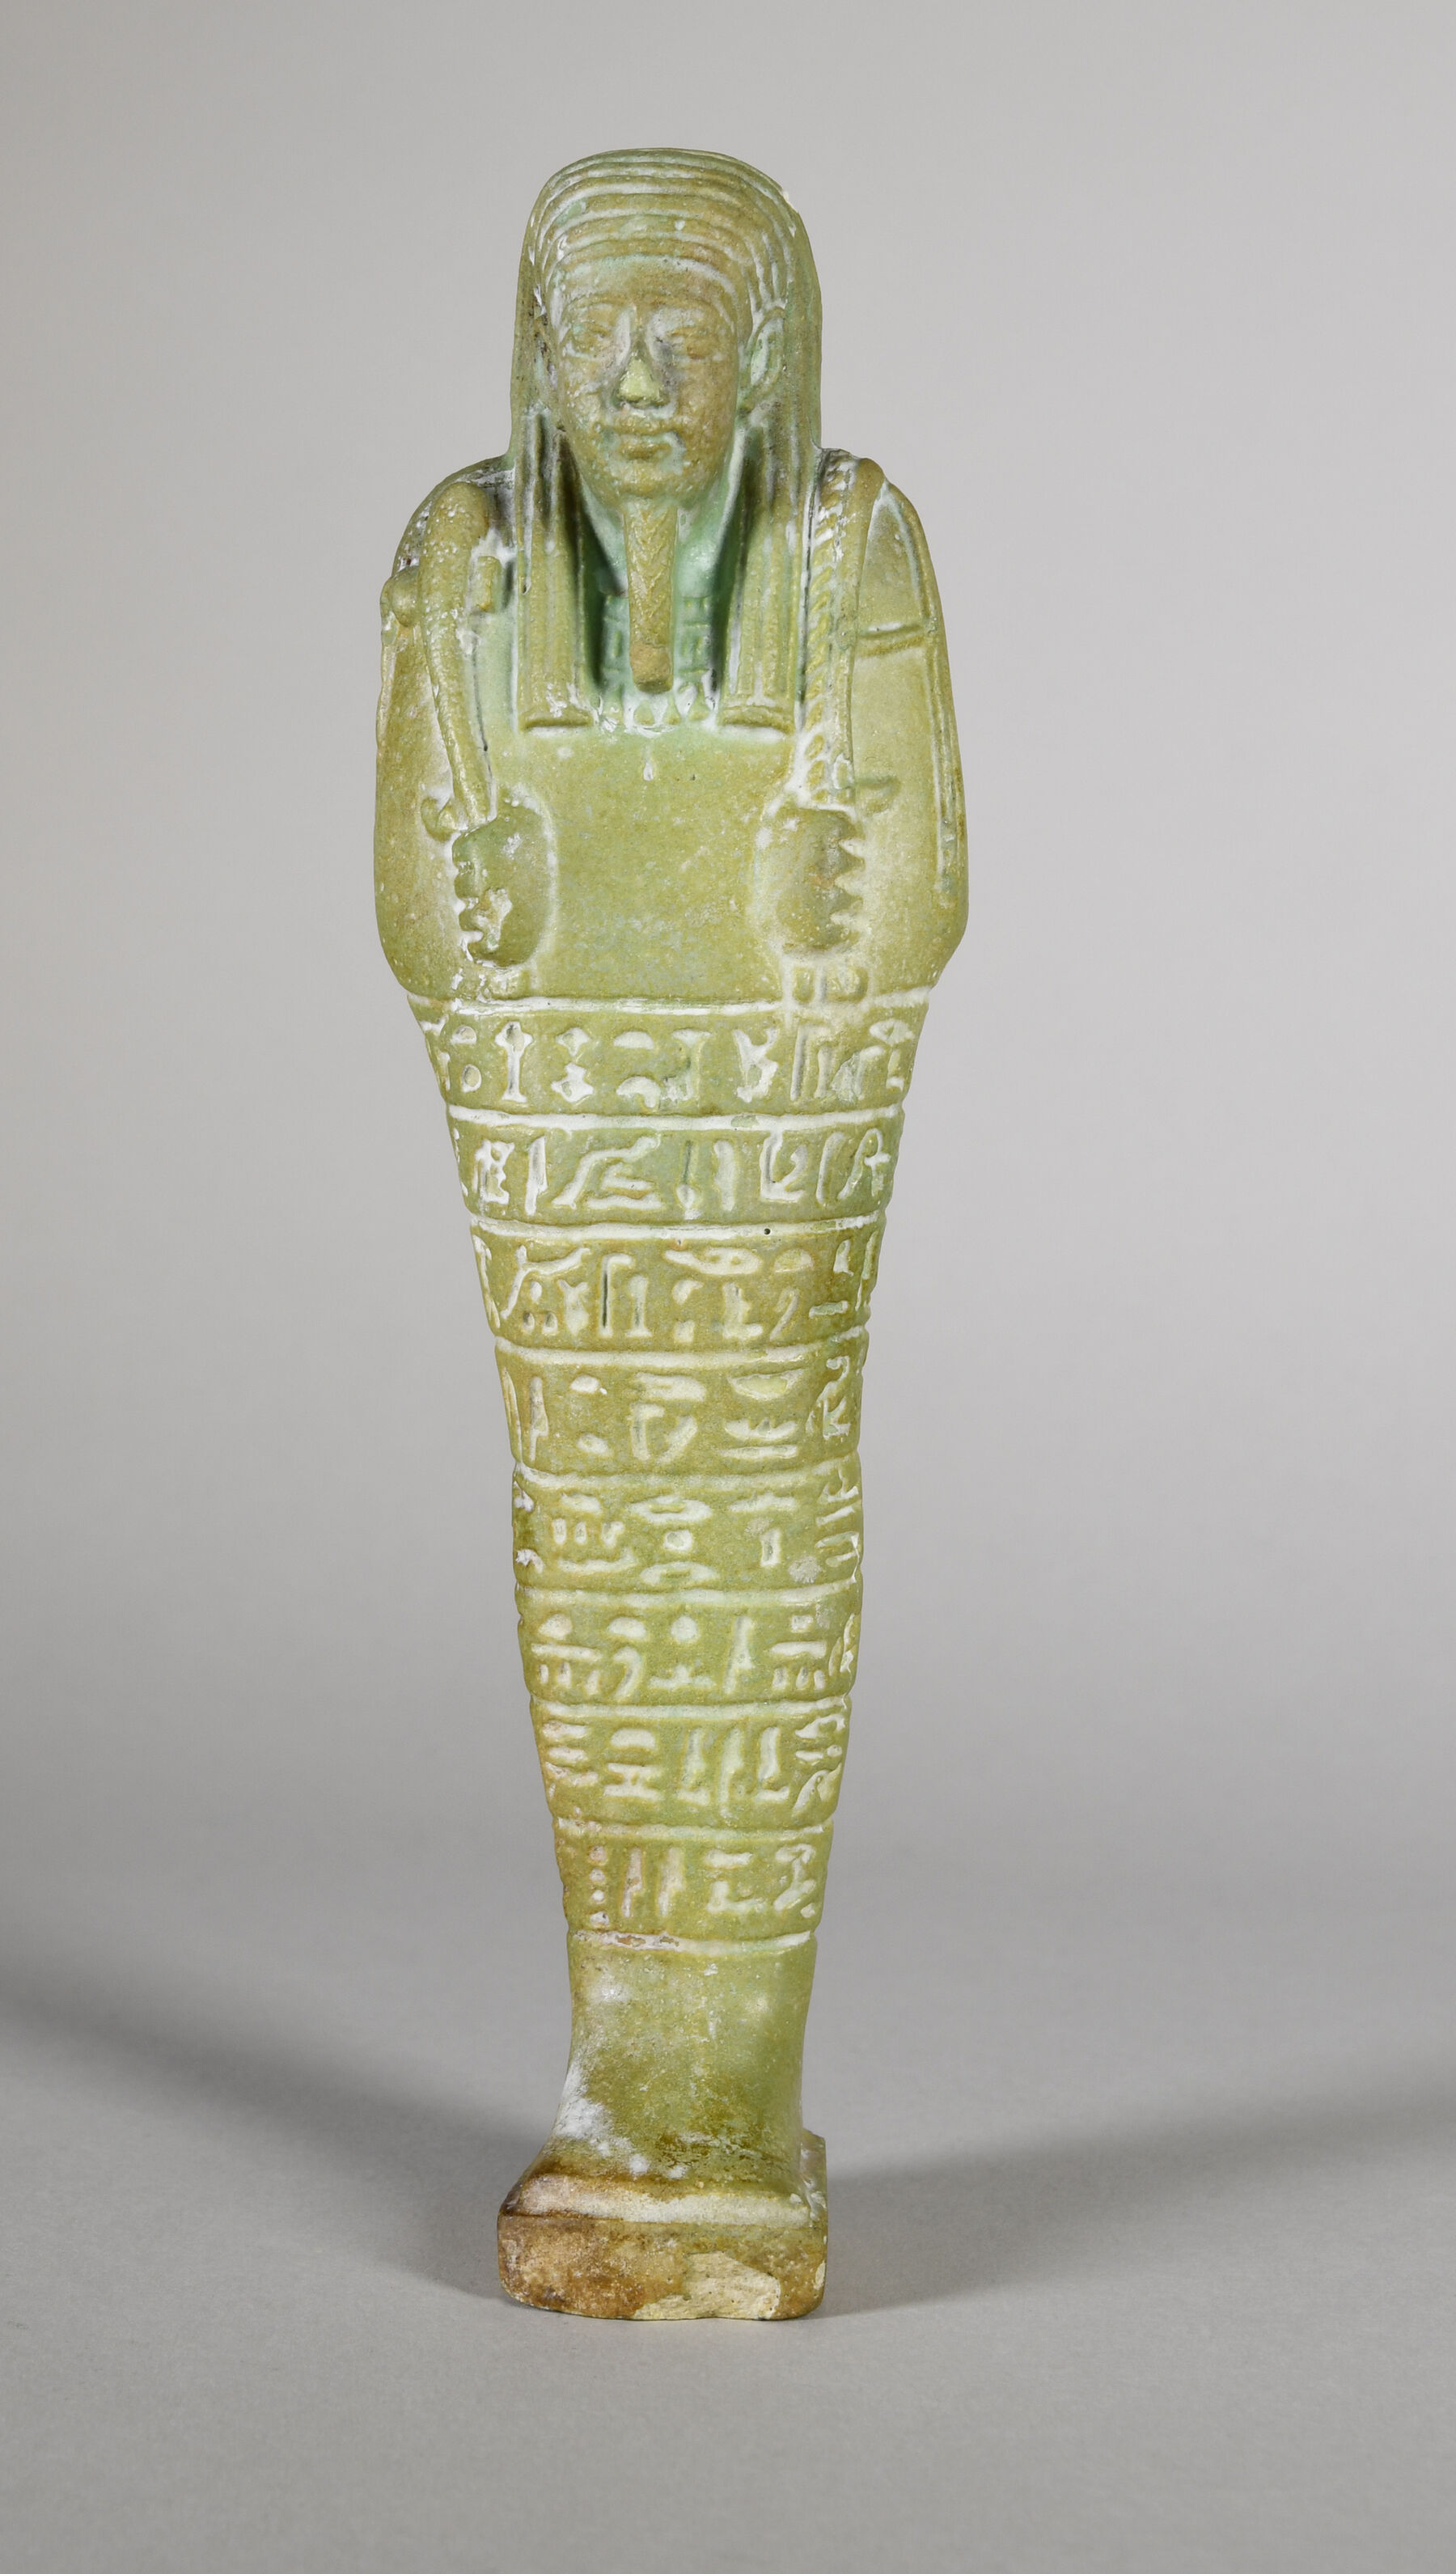 Shabti of the Prophet of Wadjet, Wahibre